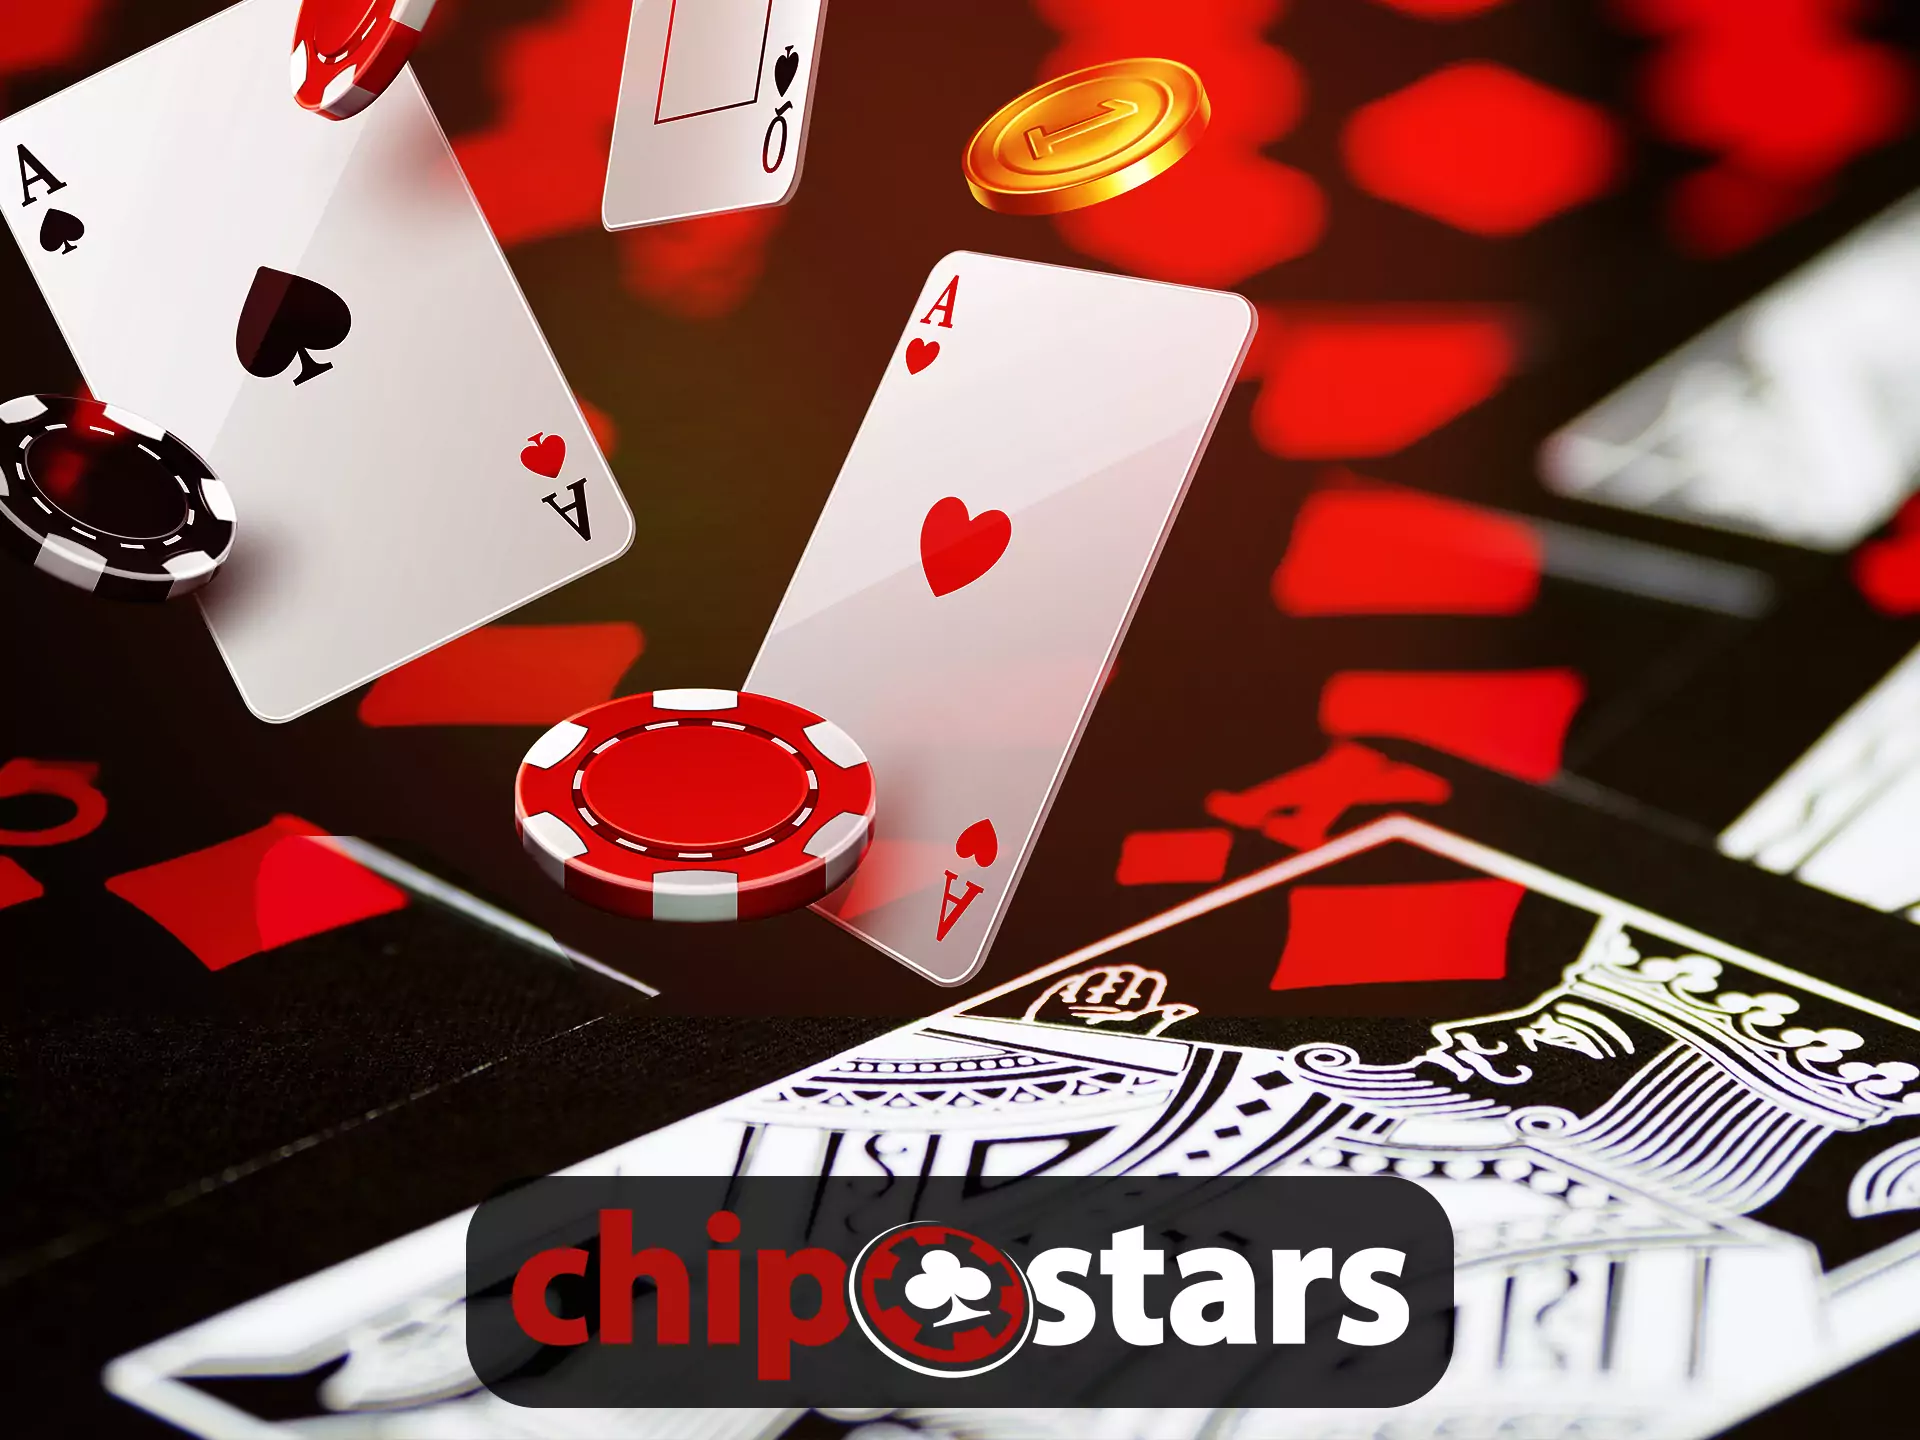 There are pros and cons to using Chipstars on mobile devices.